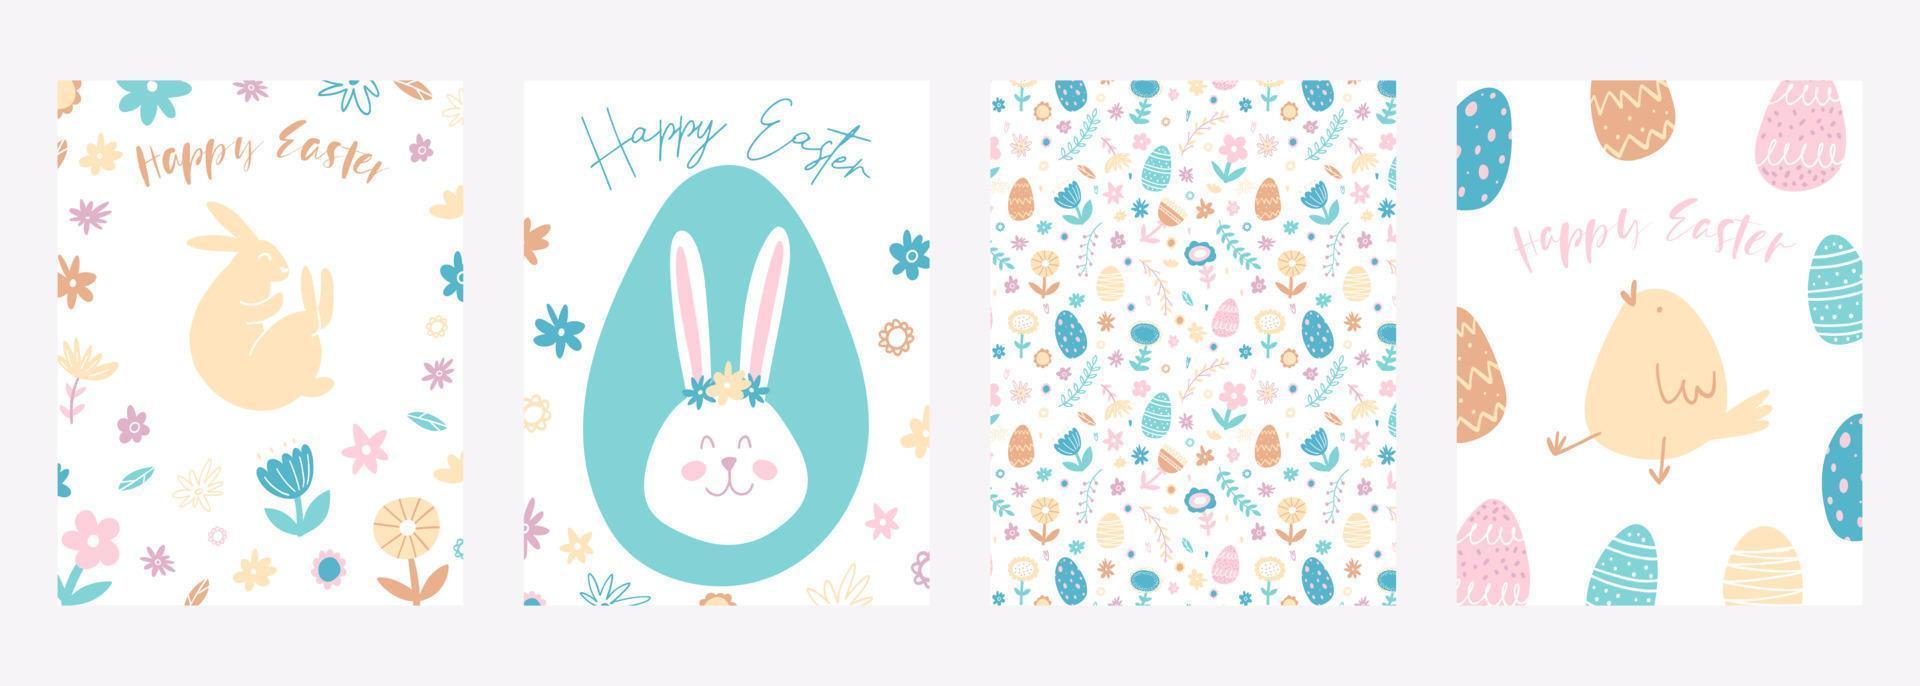 Set of Happy Easter greeting cards. Hand drawn colorful plants, bunny, chicken, eggs in modern minimalist style vector